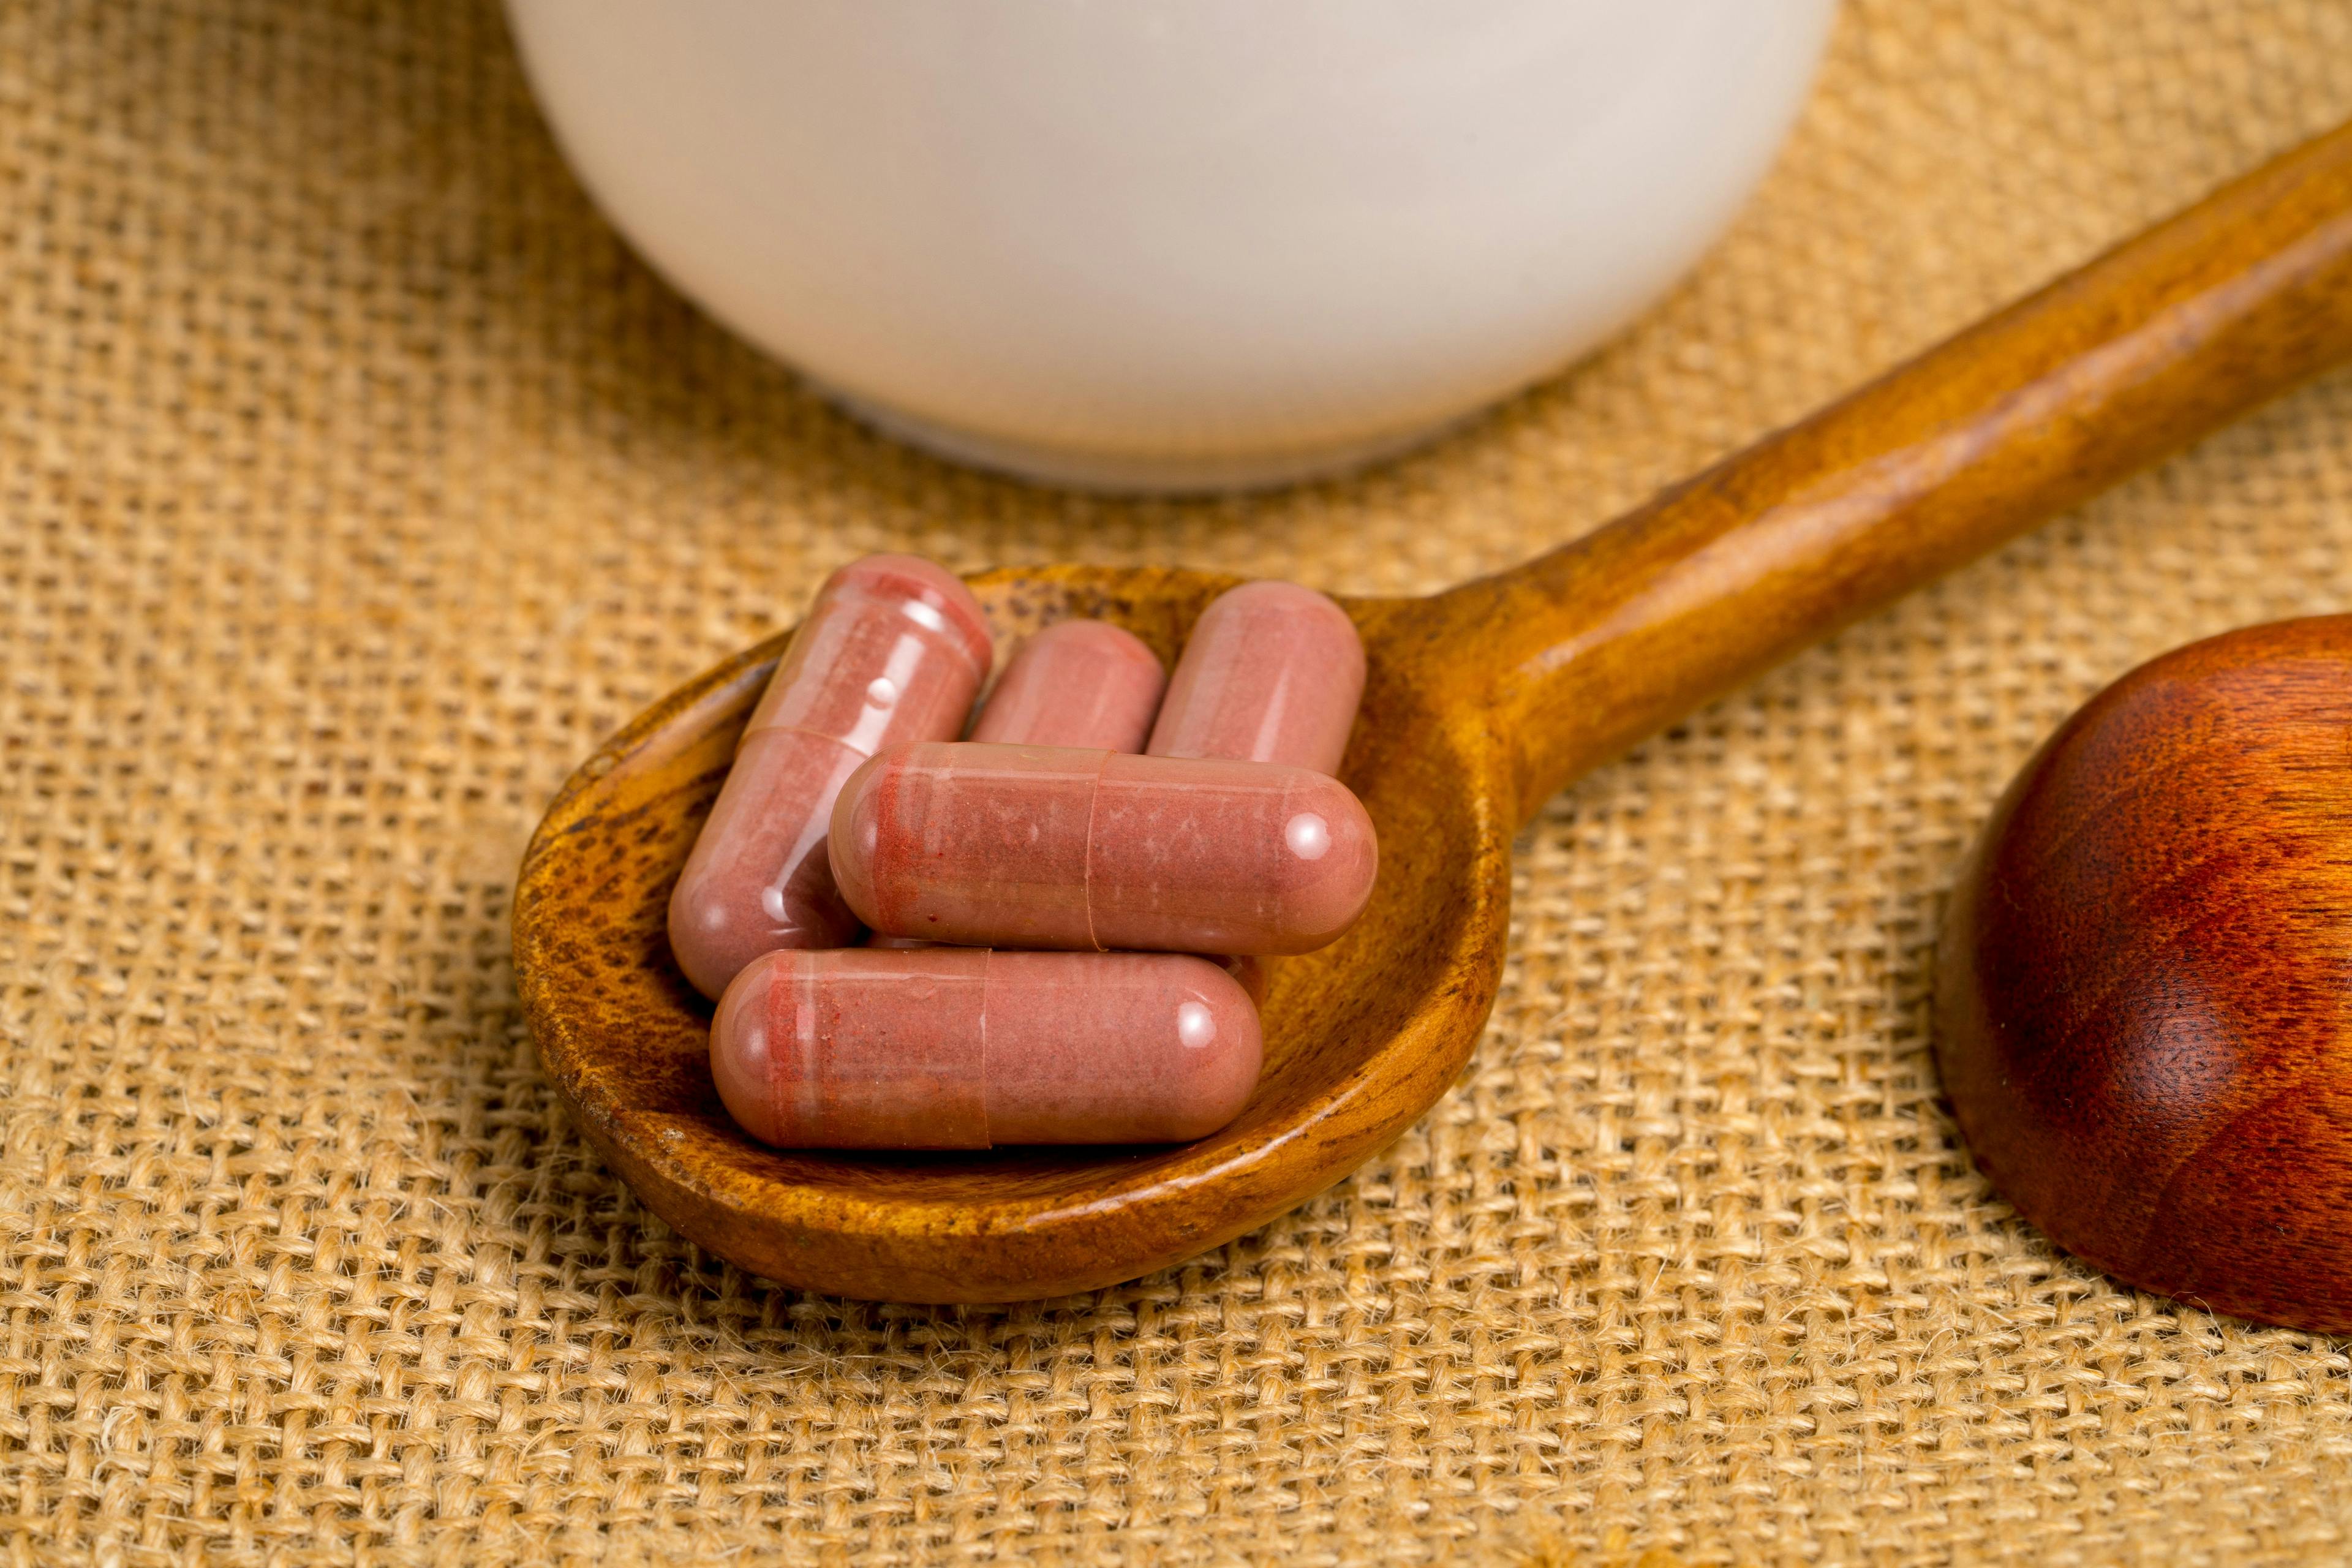 Buyer Beware: Red Yeast Rice Supplements Linked to Deaths, Hospitalizations